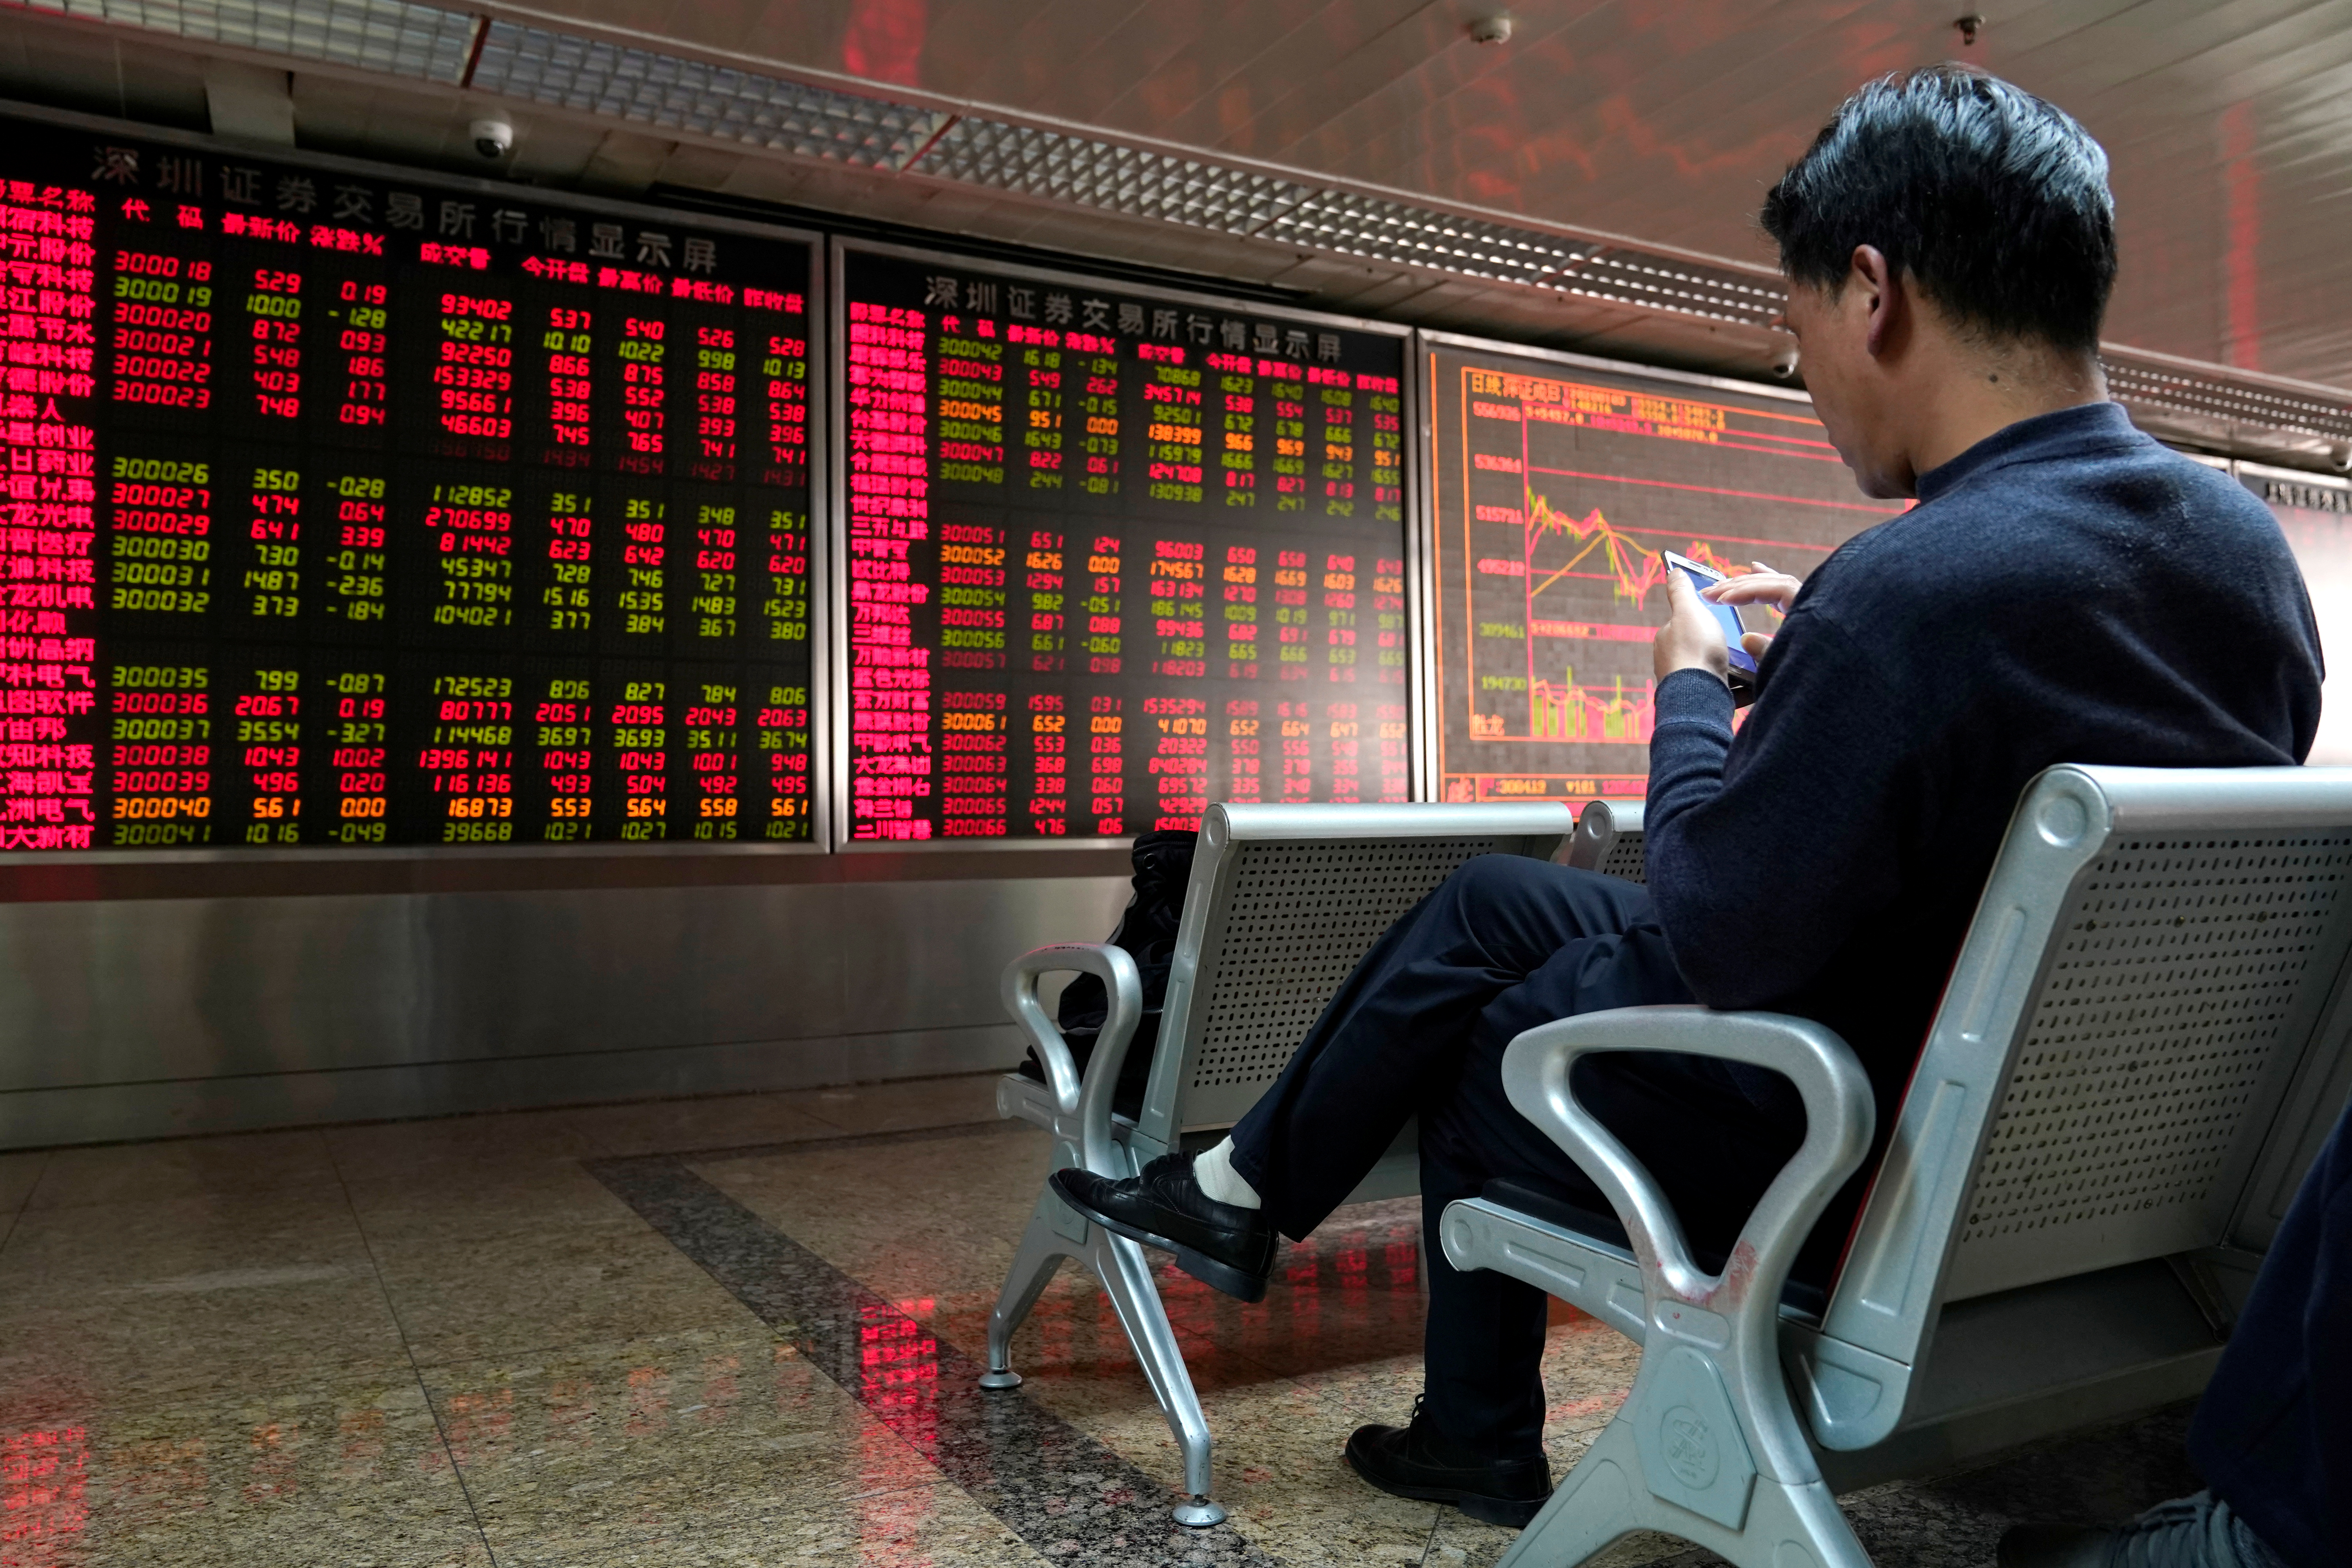 An investor uses his mobile phone in front of a stock quotation board at a brokerage office in Beijing